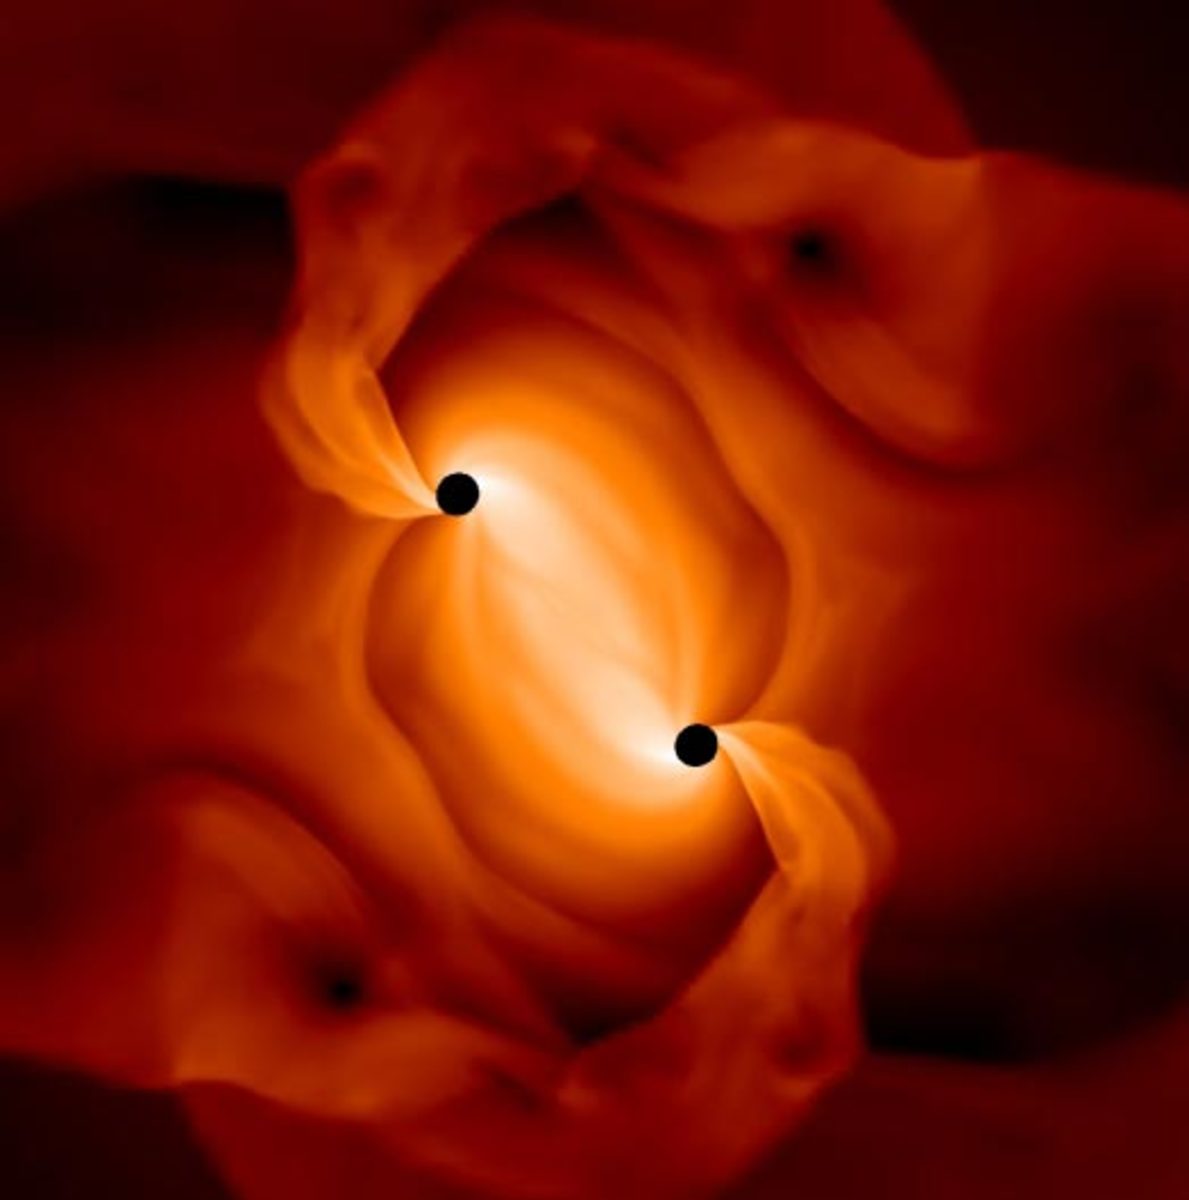 How Do Black Holes Interact, Collide, and Merge With Each Other?